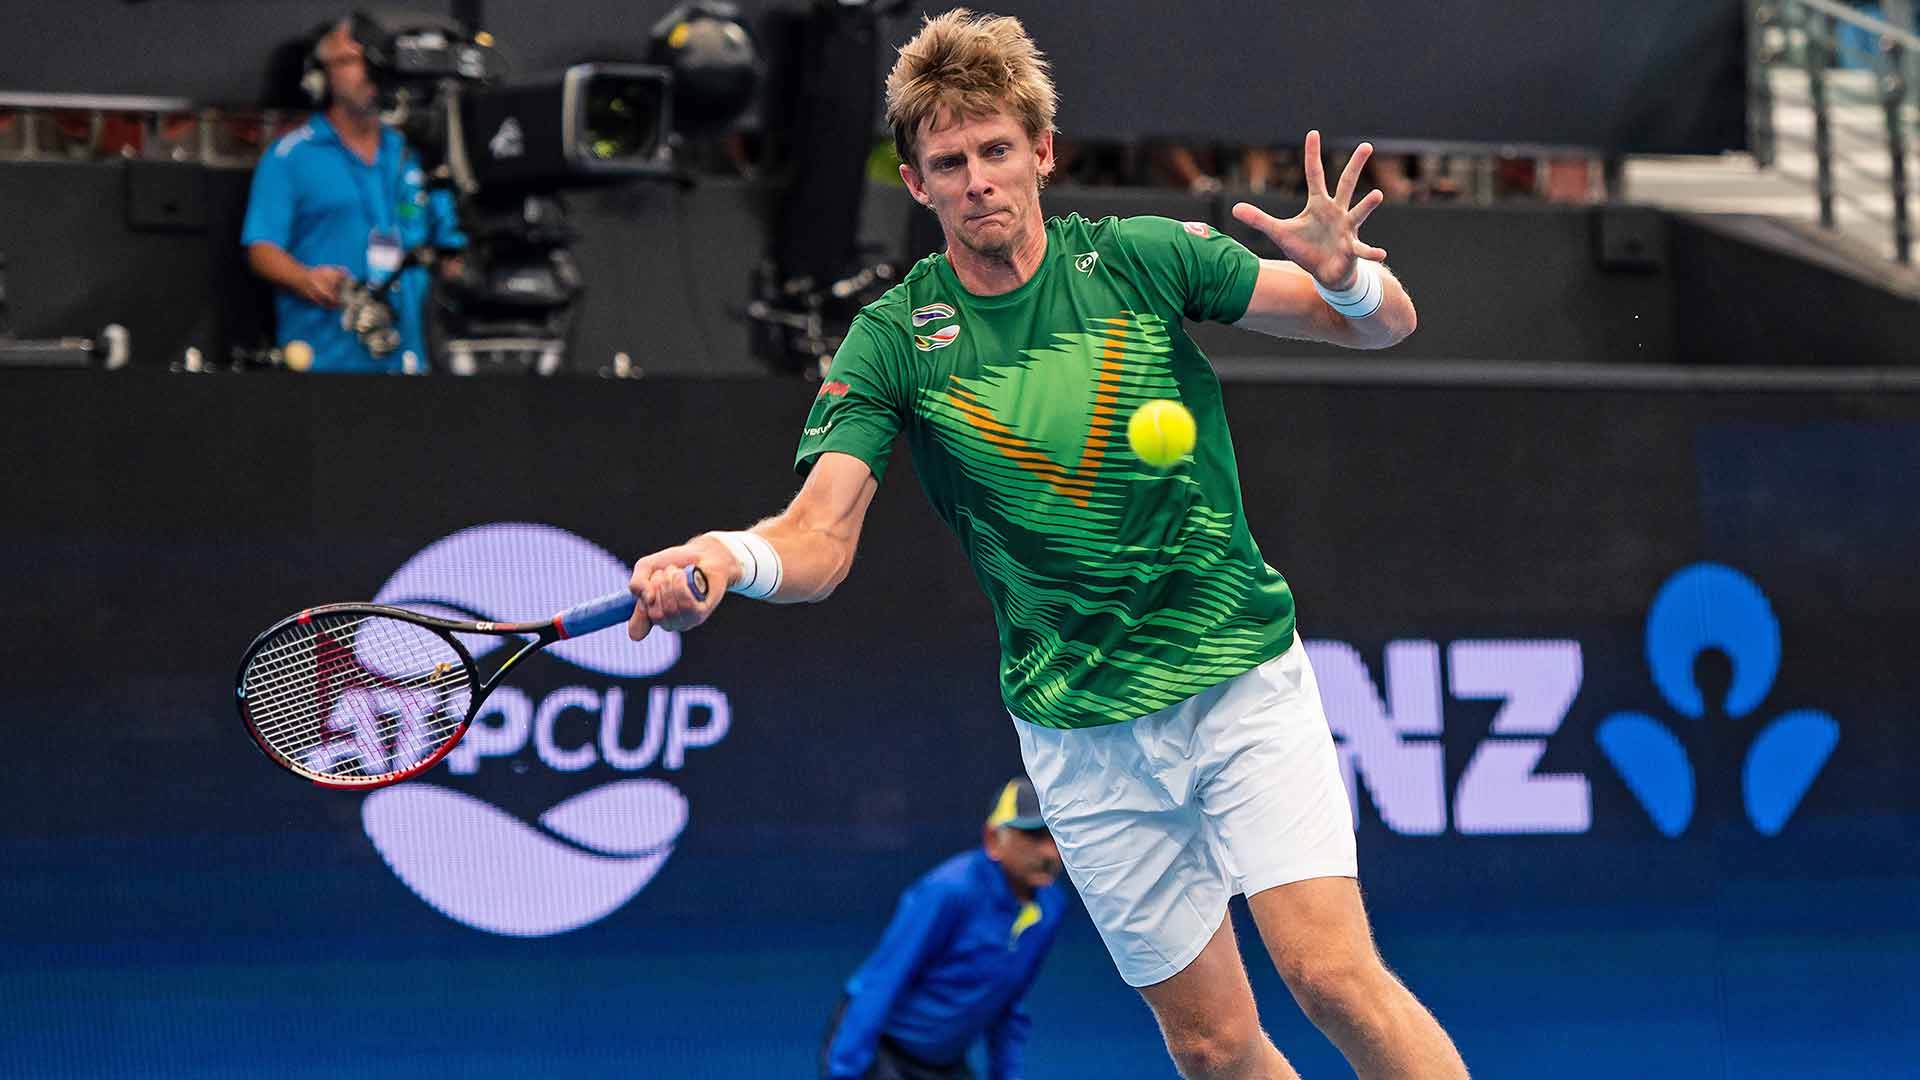 Kevin Anderson earns his first win of the 2020 season on Monday at the ATP Cup in Brisbane.